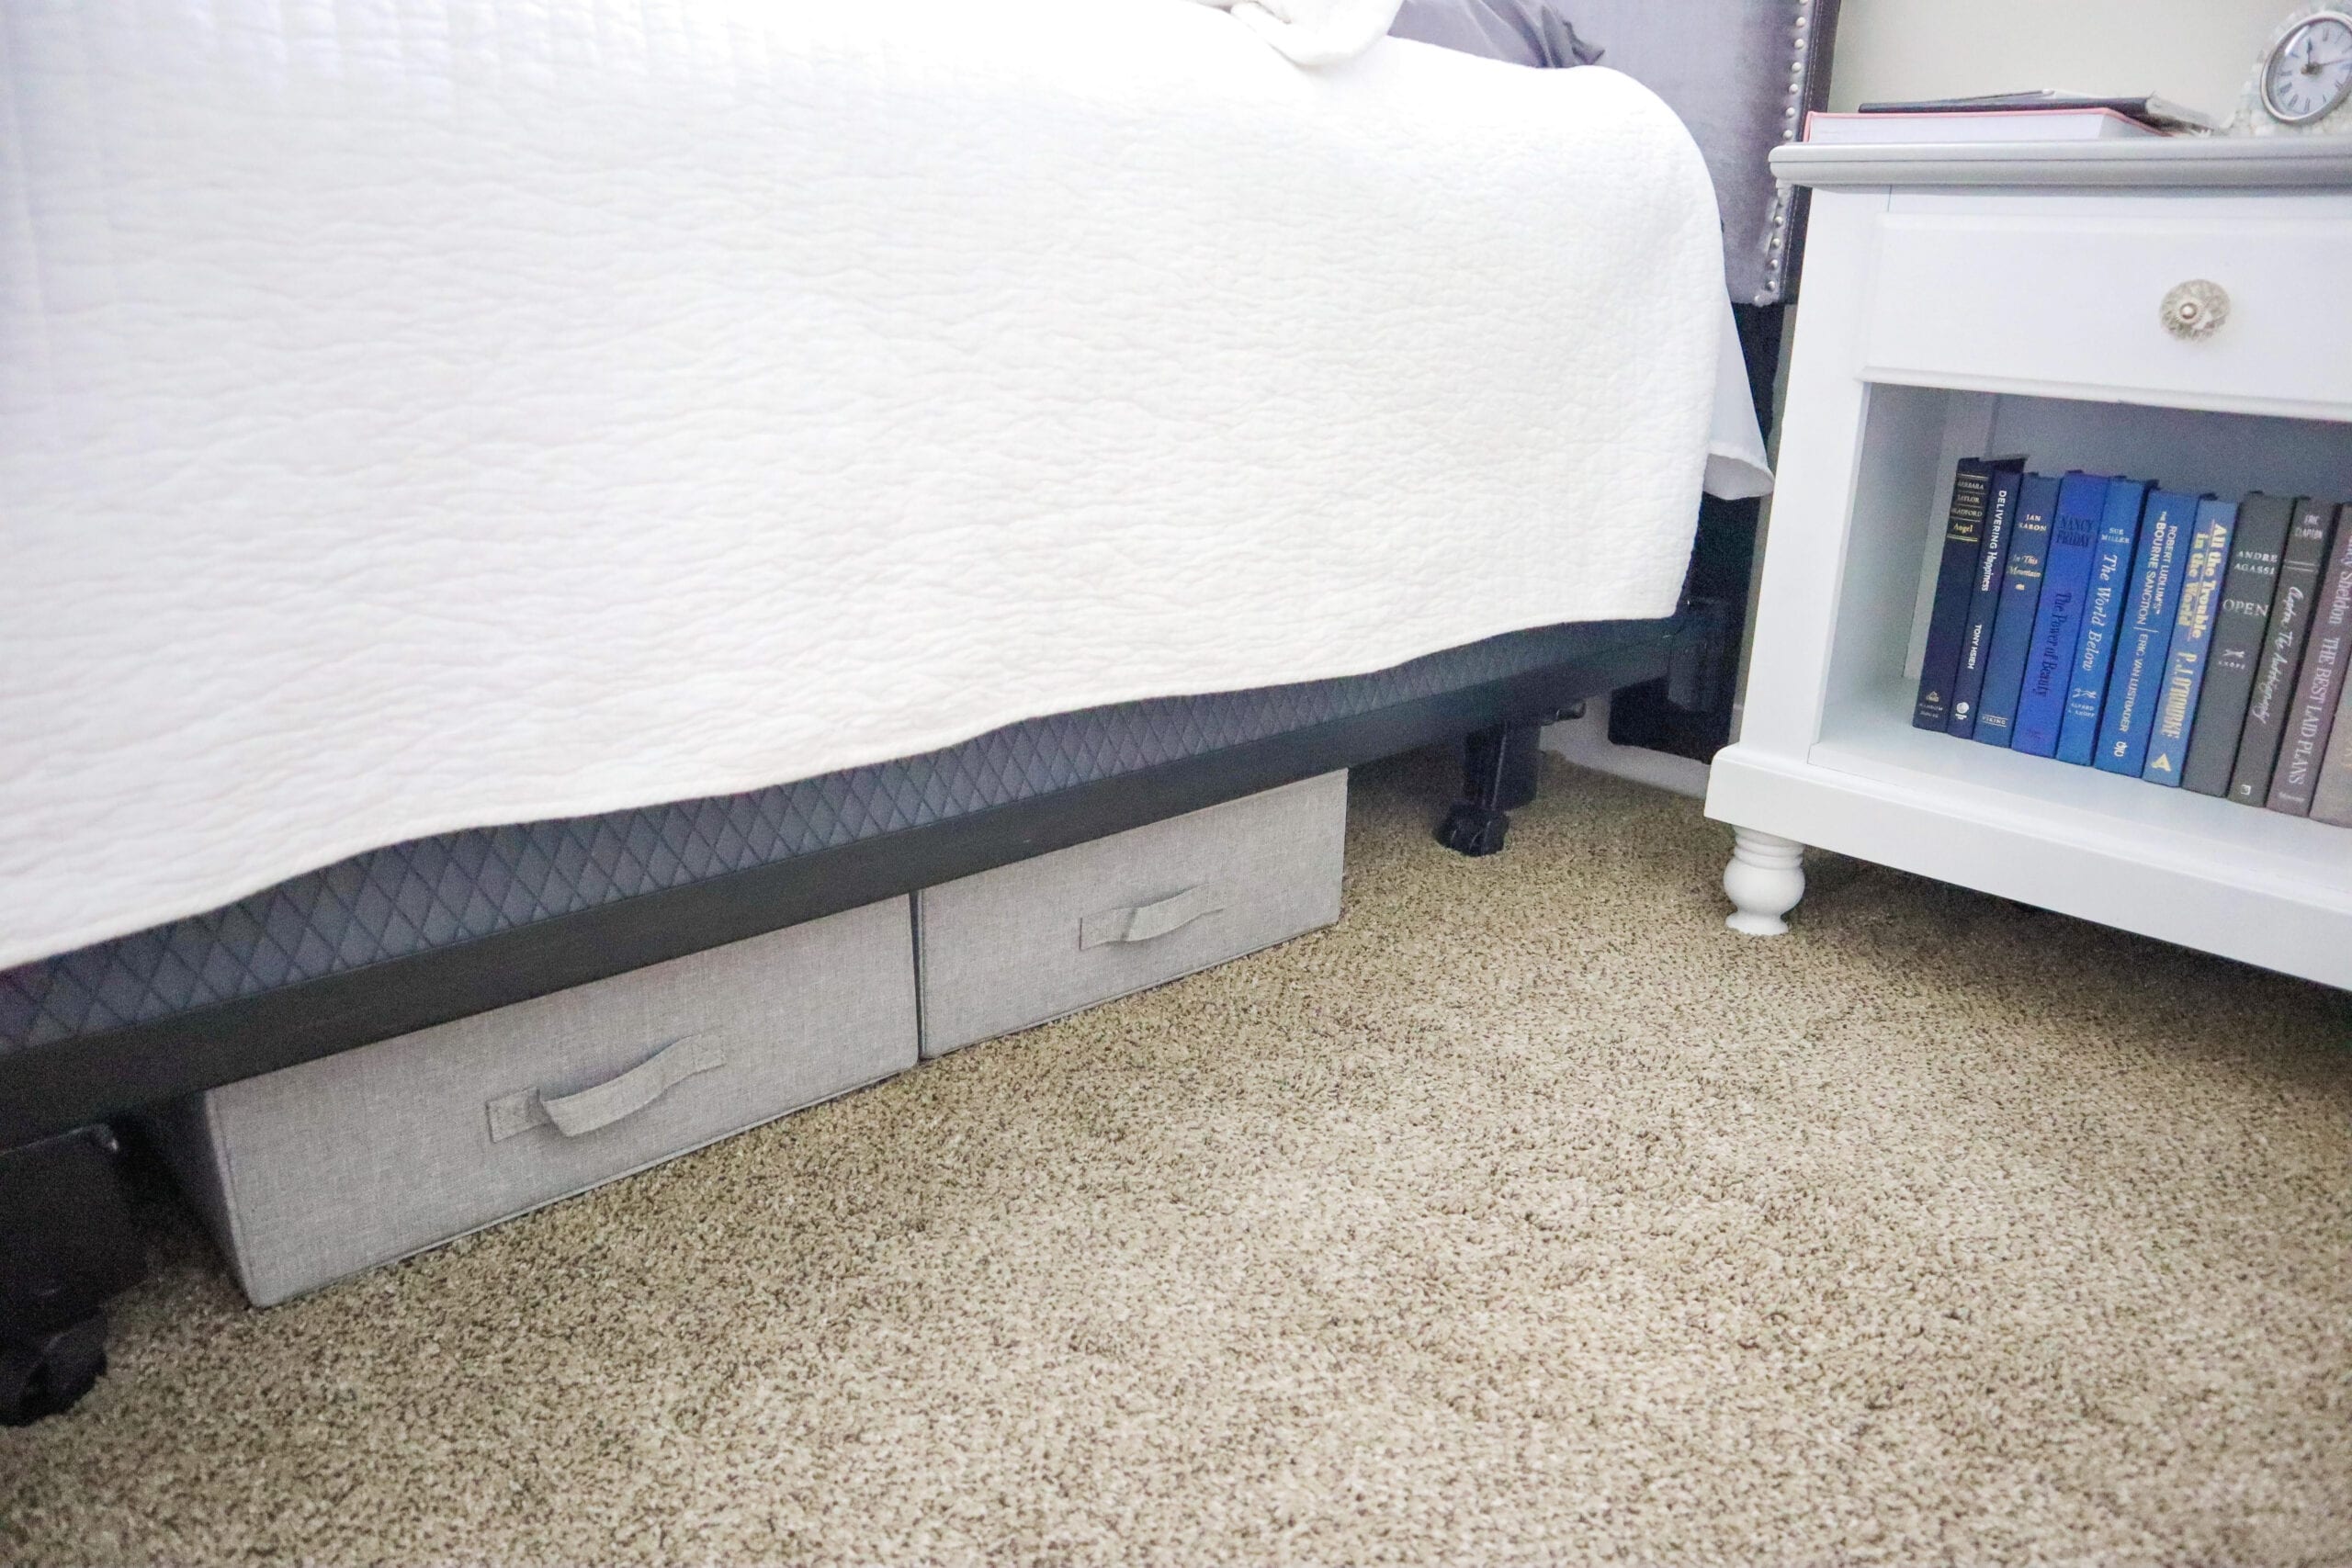 17 Practical Ideas for Organizing Under Your Bed